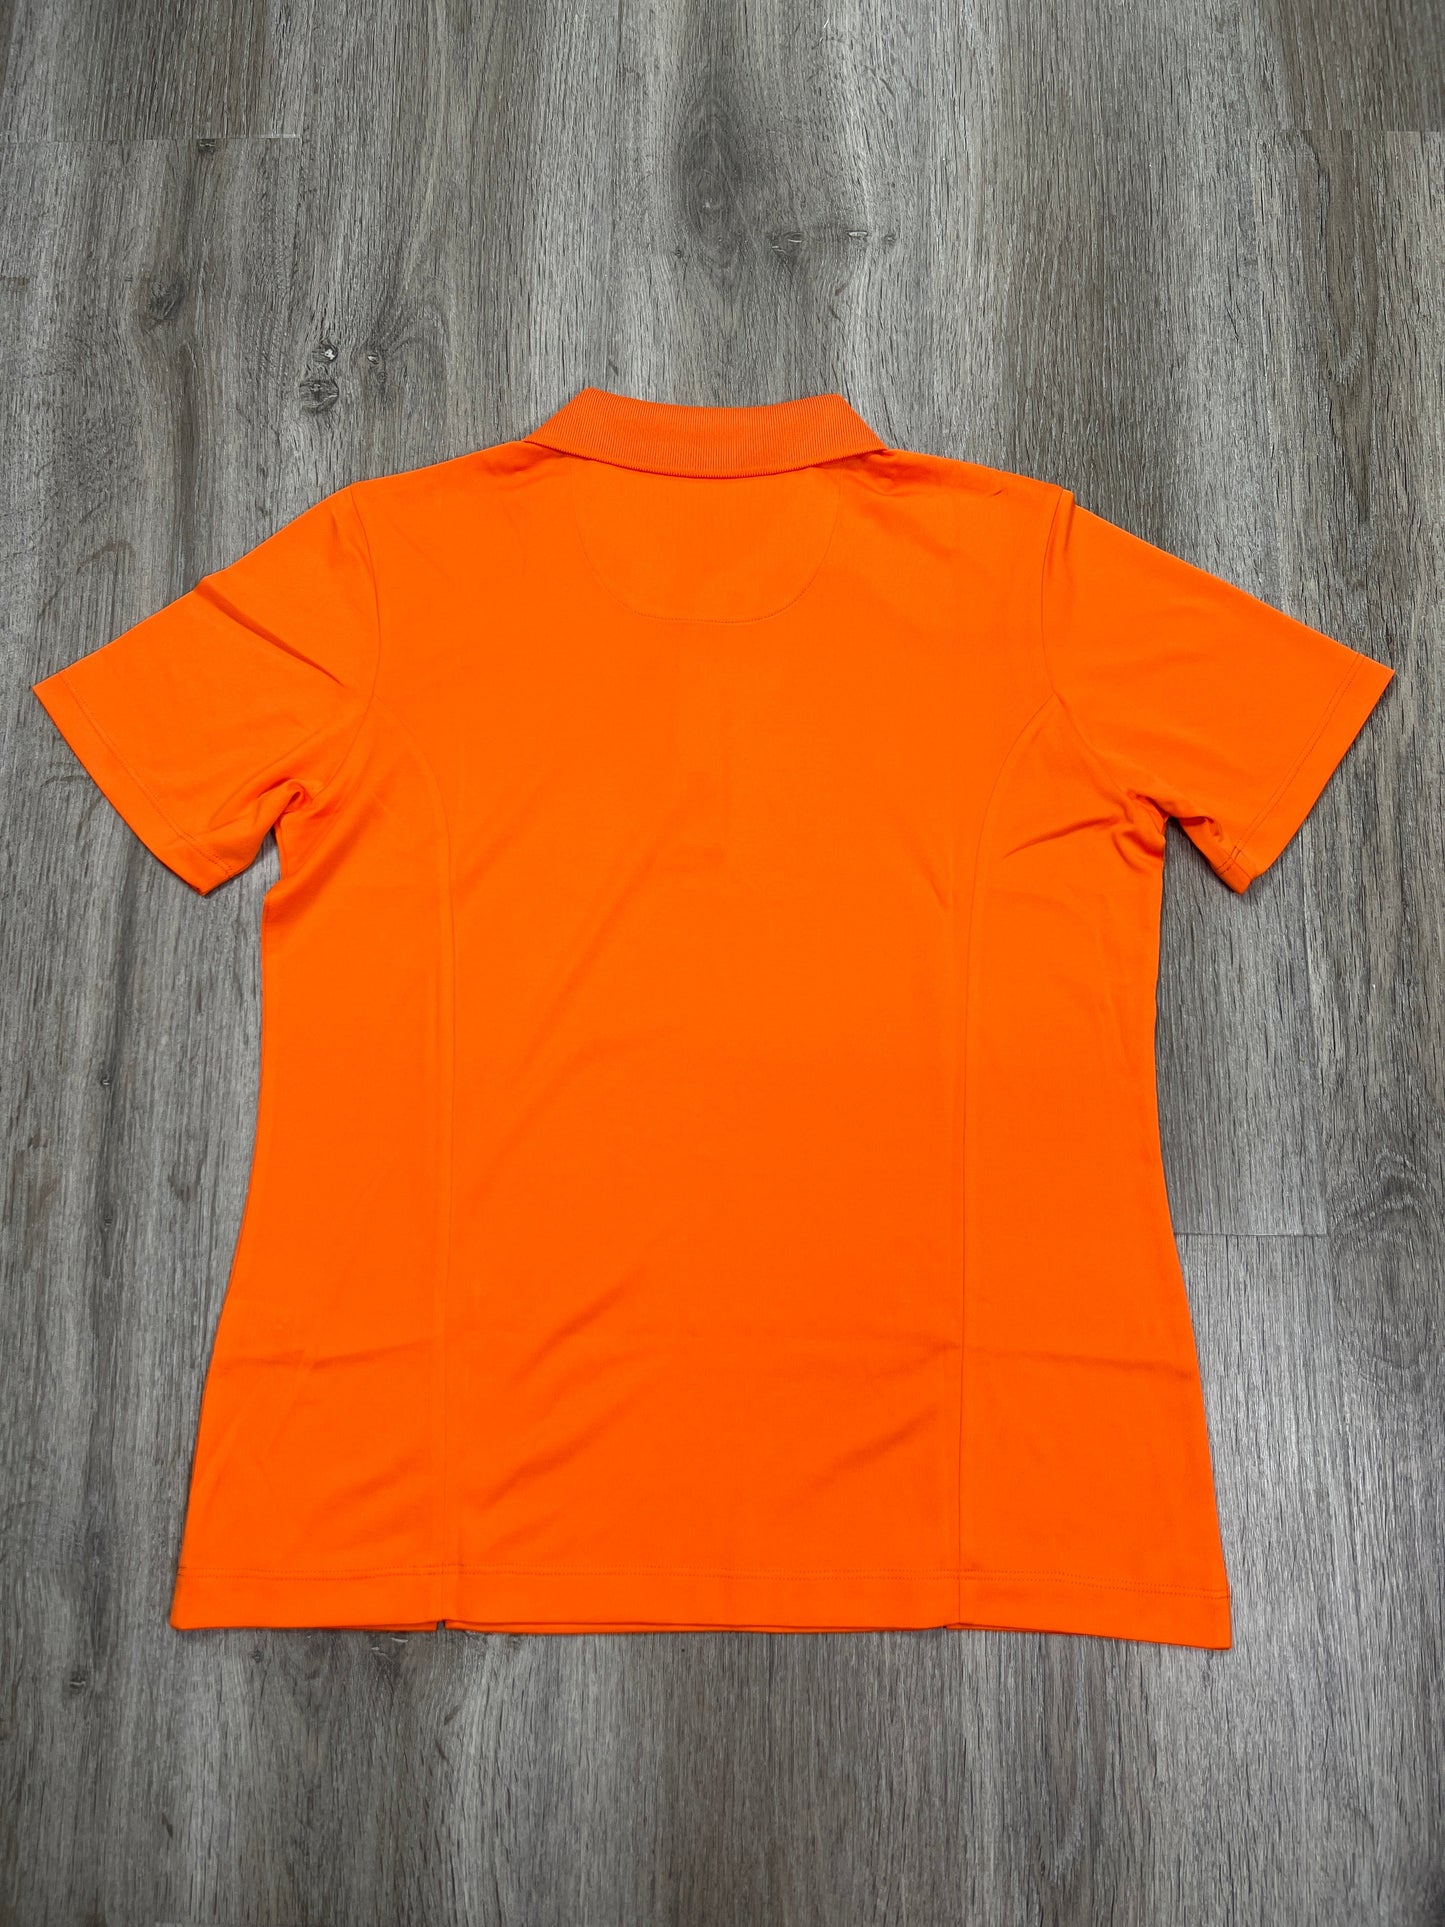 Orange Athletic Top Short Sleeve Clothes Mentor, Size S